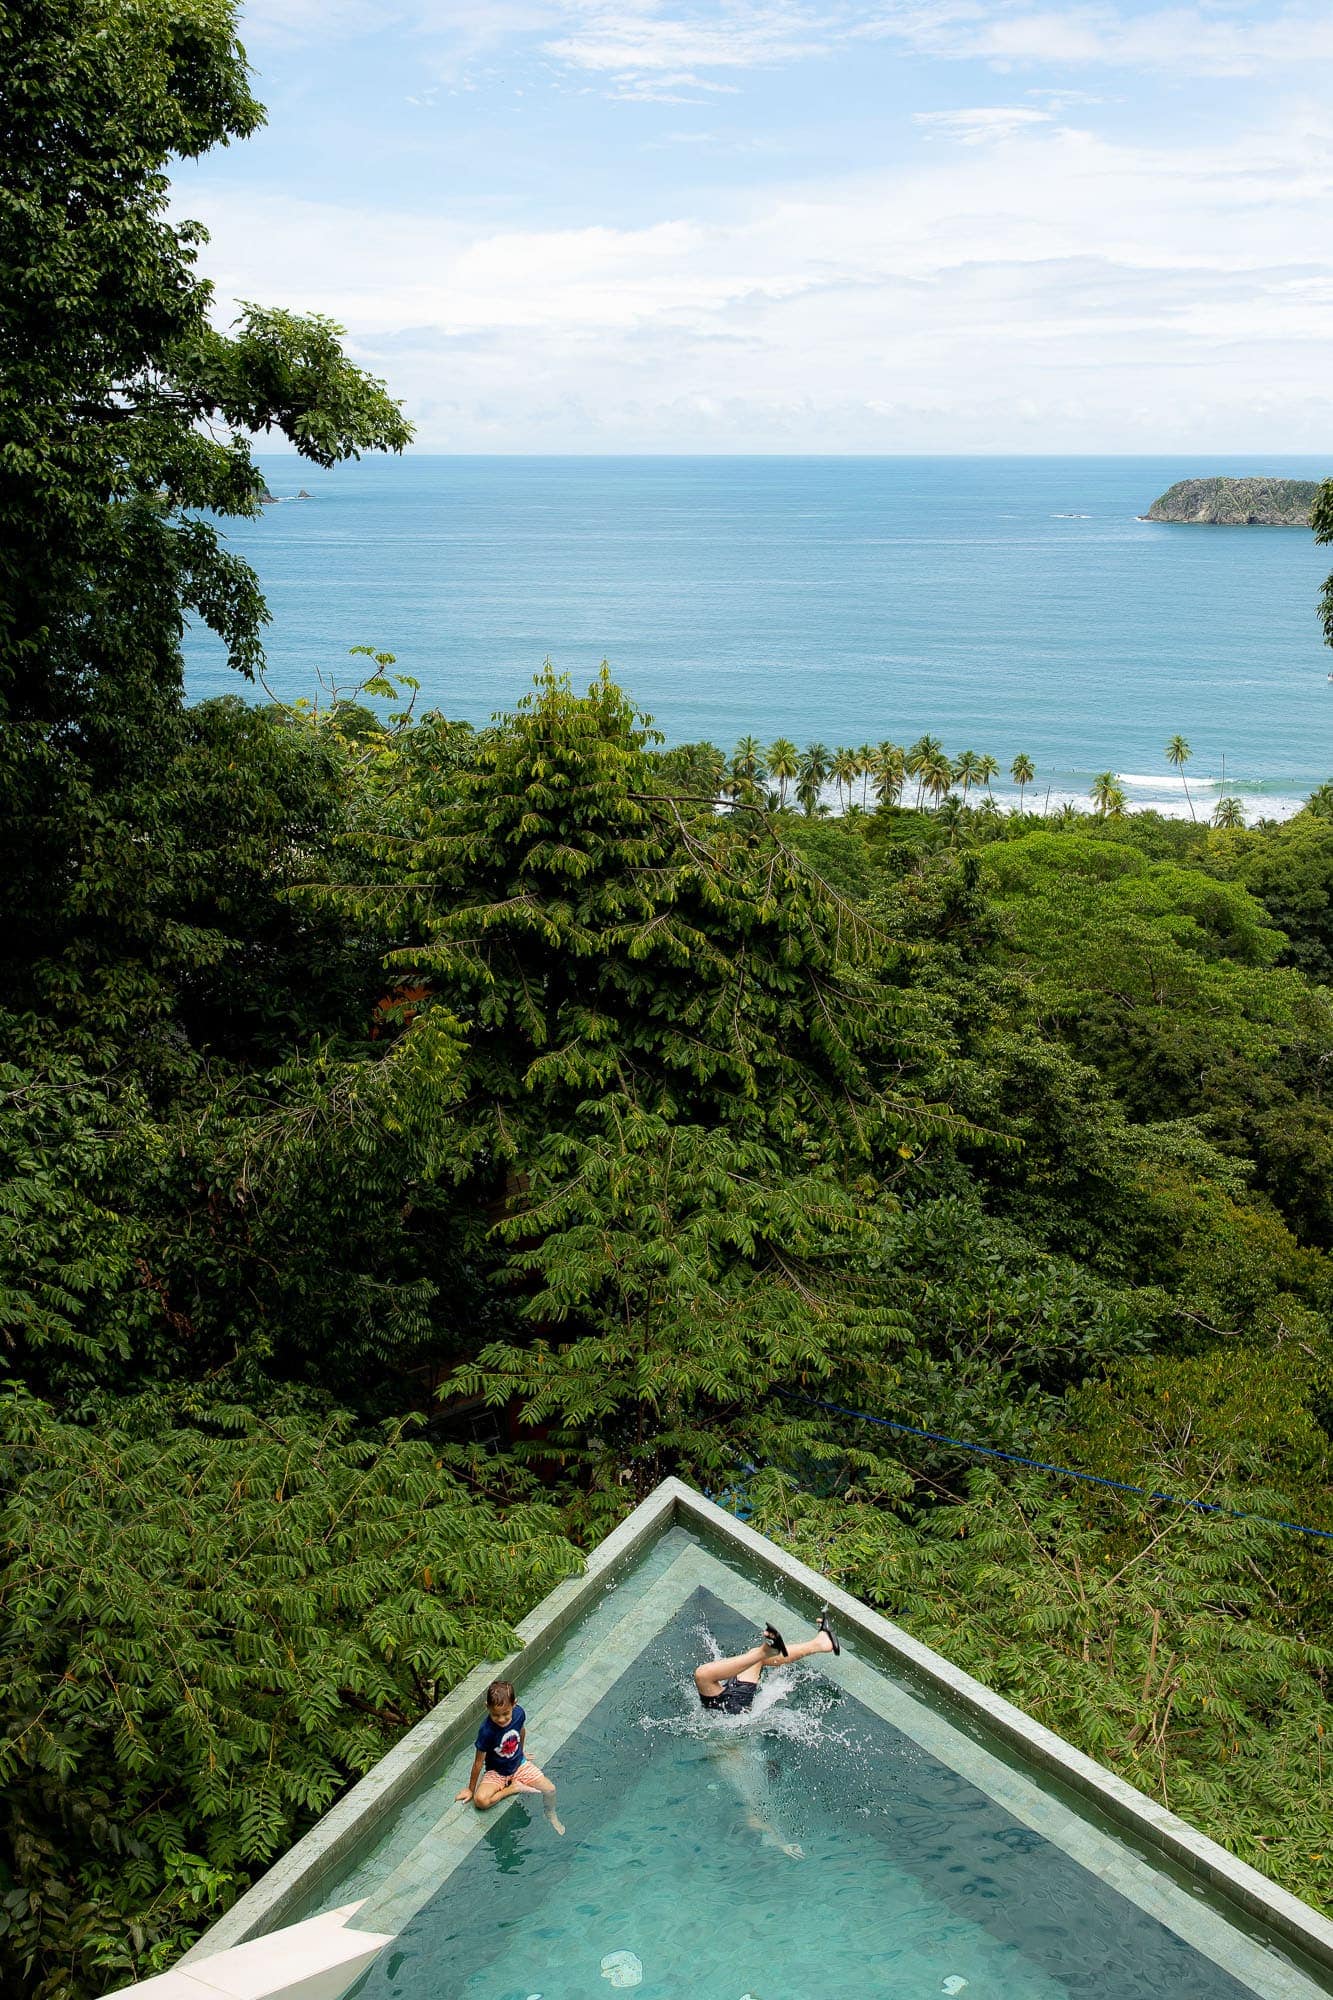 Enjoy the ocean view from a pointy pool overlooking the jungle